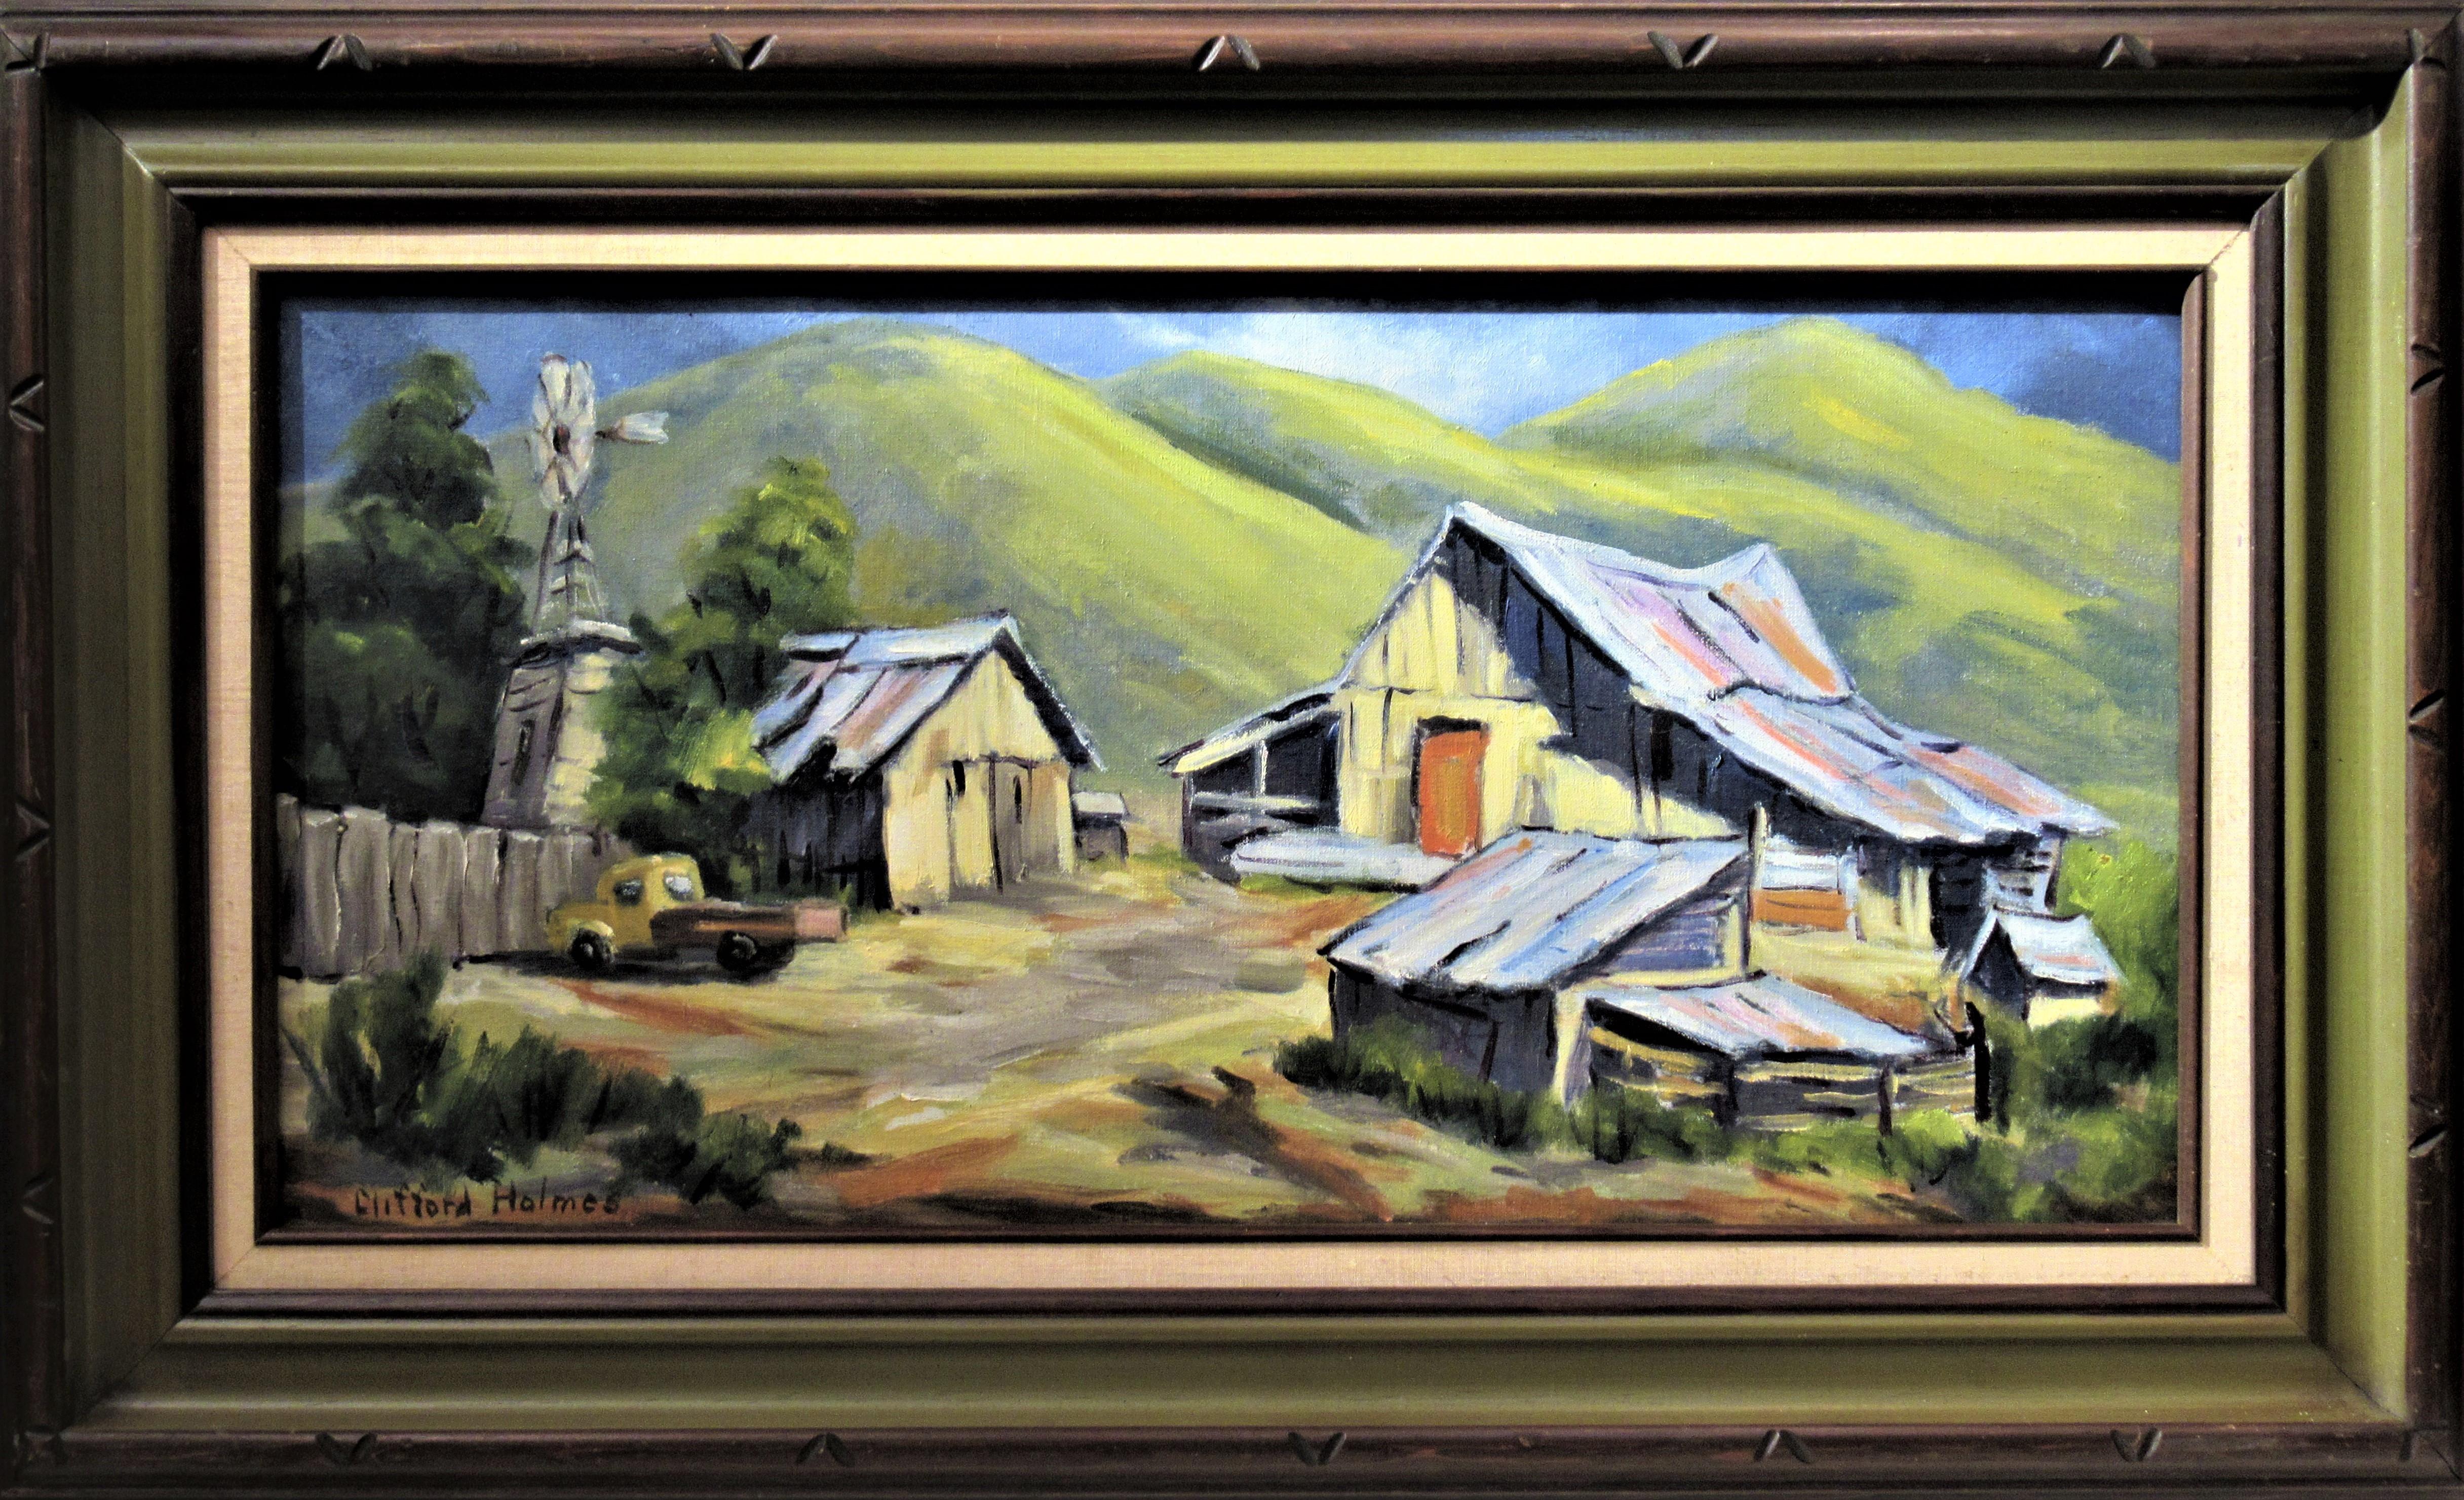 Clifford Holmes Figurative Painting - The Old Farm, California